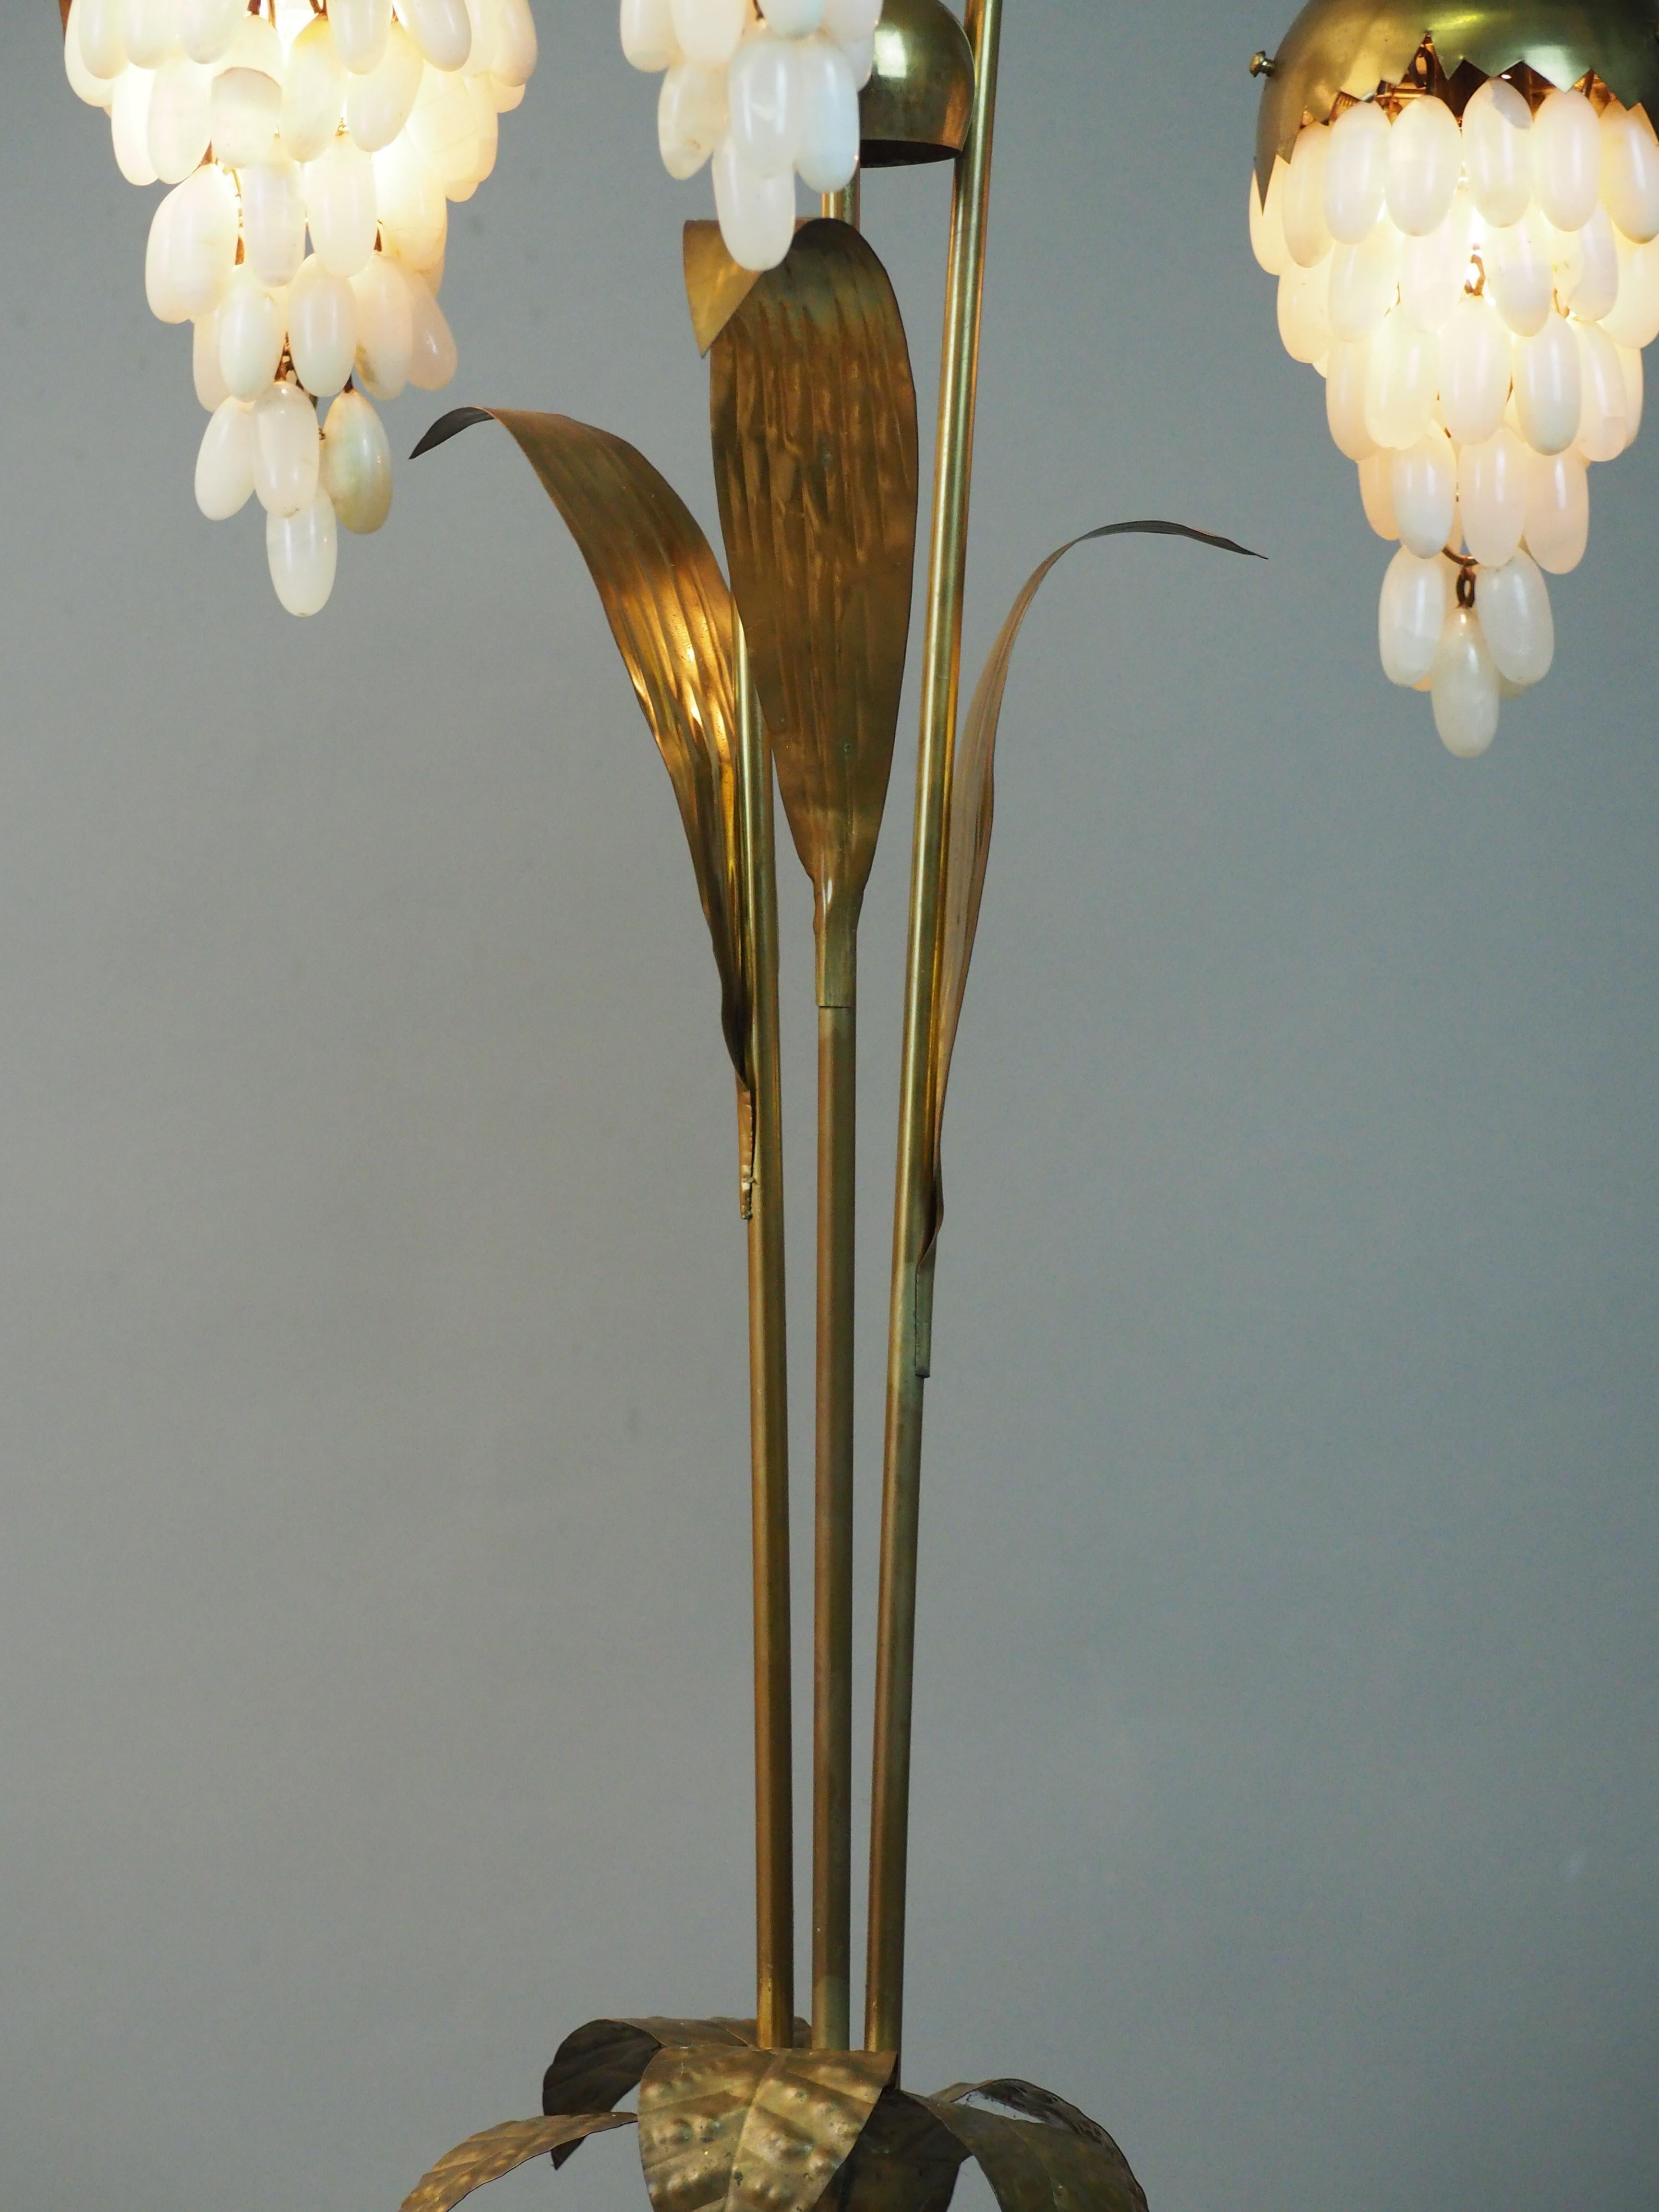 Mid-Century Brass Floor Lamp with Leafs and Alabaster Grapes, circa 1950s For Sale 4